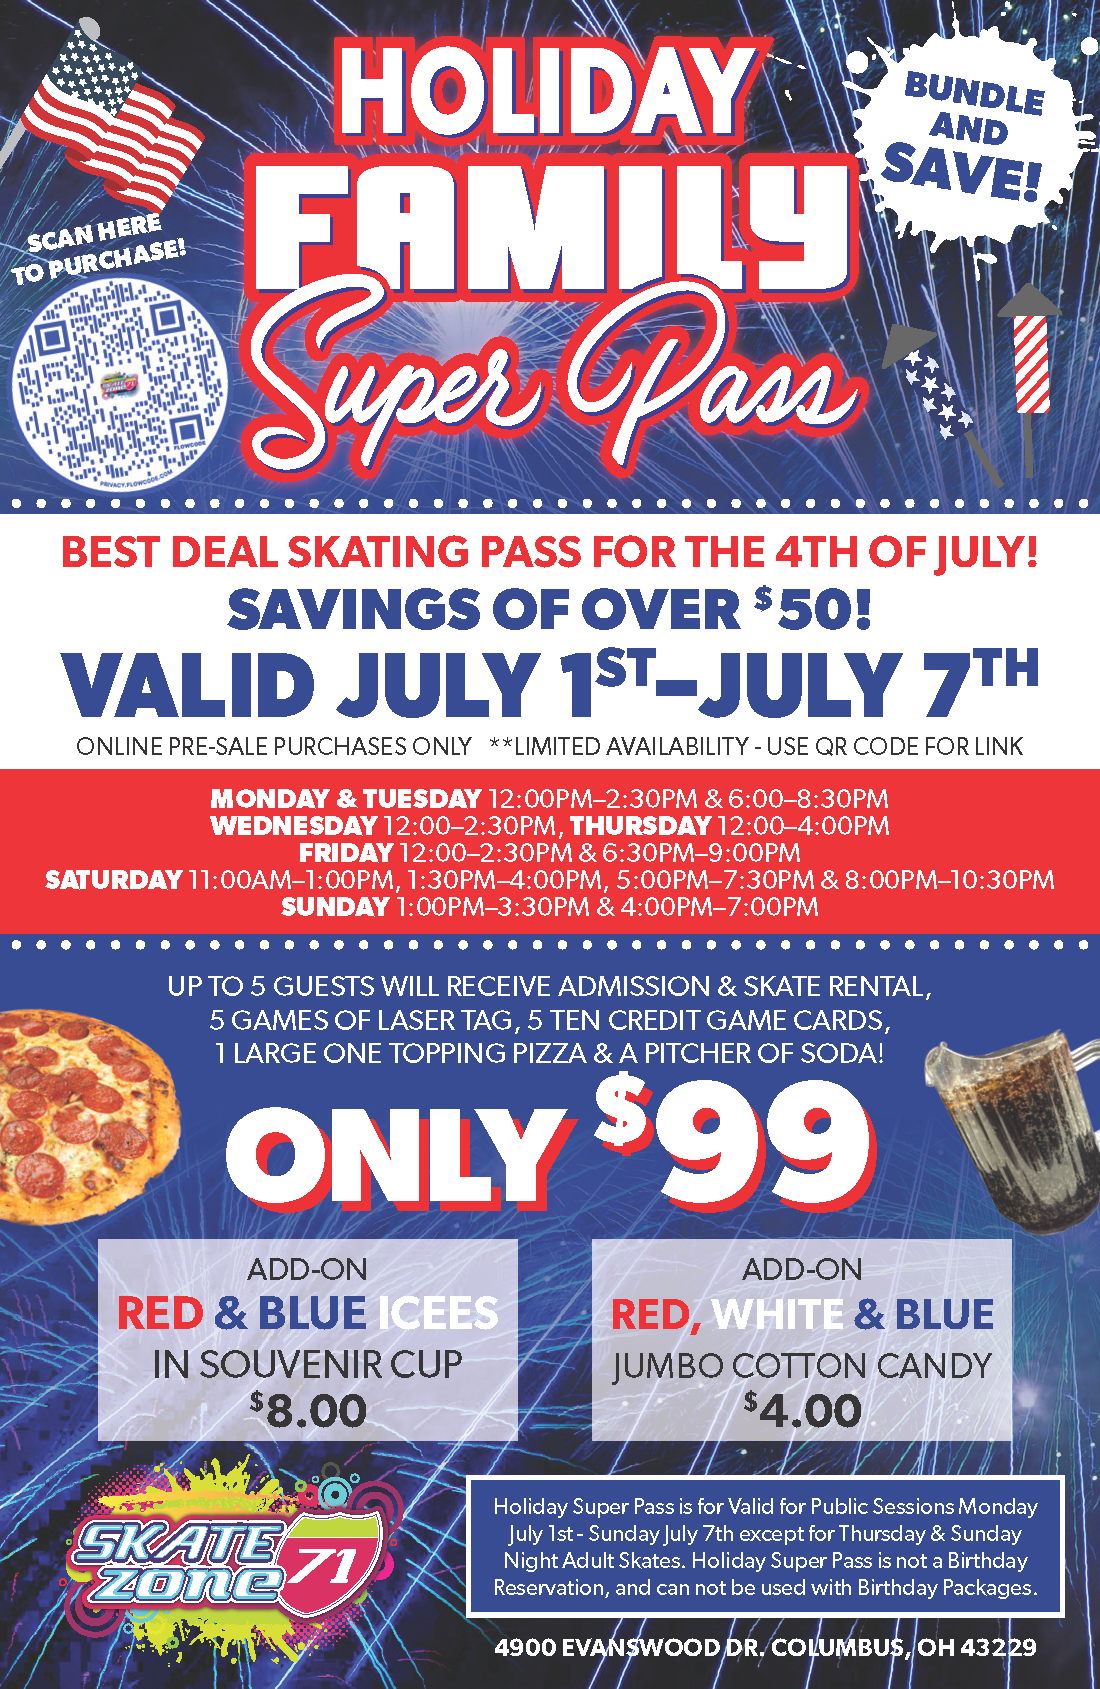 4th of July Special Super Pass at Skate Zone 71